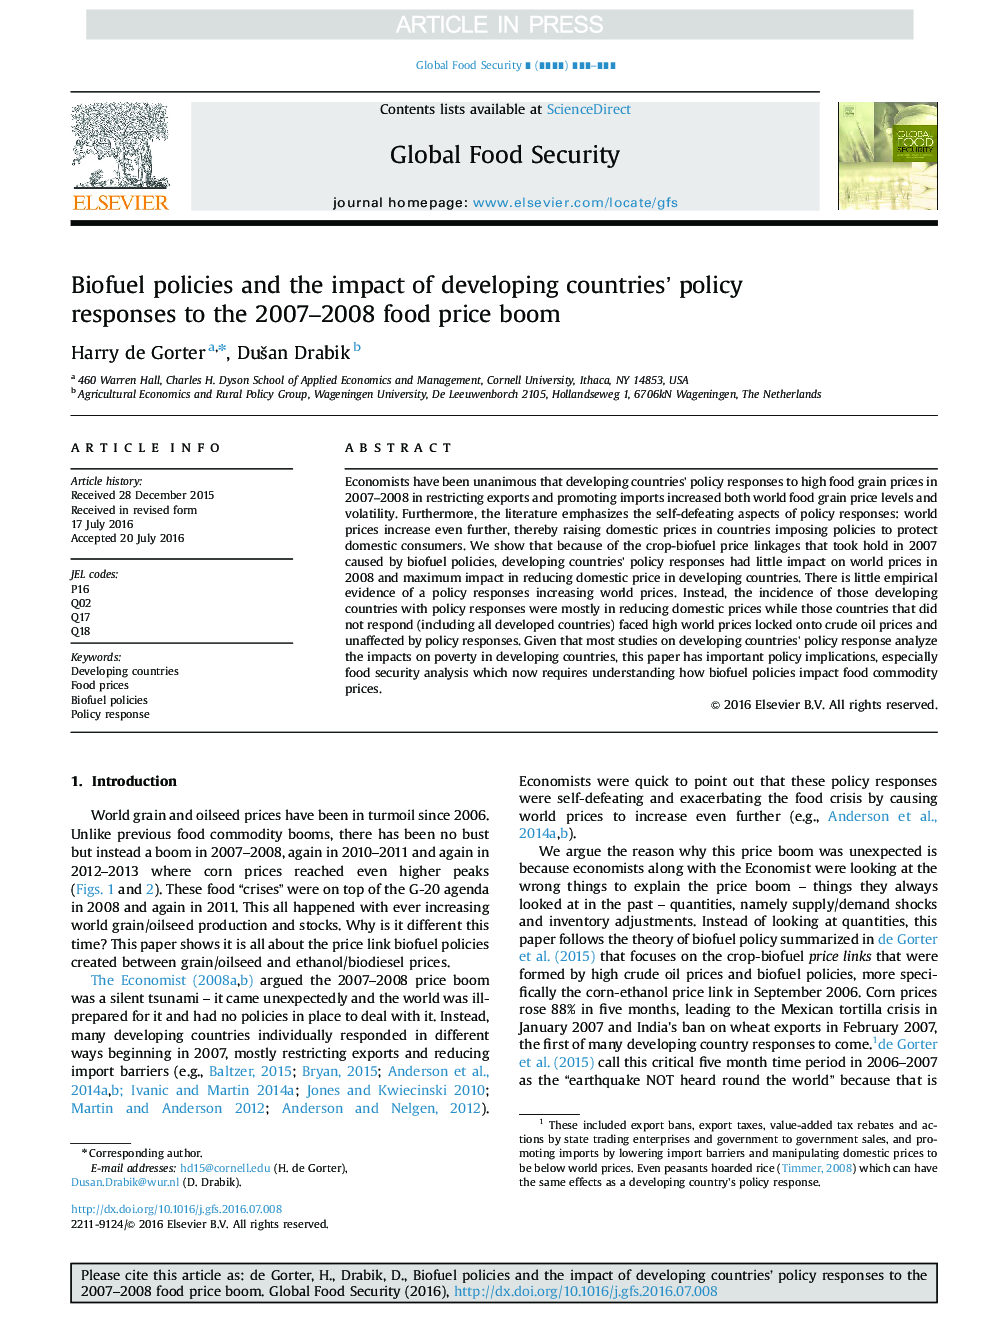 Biofuel policies and the impact of developing countries' policy responses to the 2007-2008 food price boom